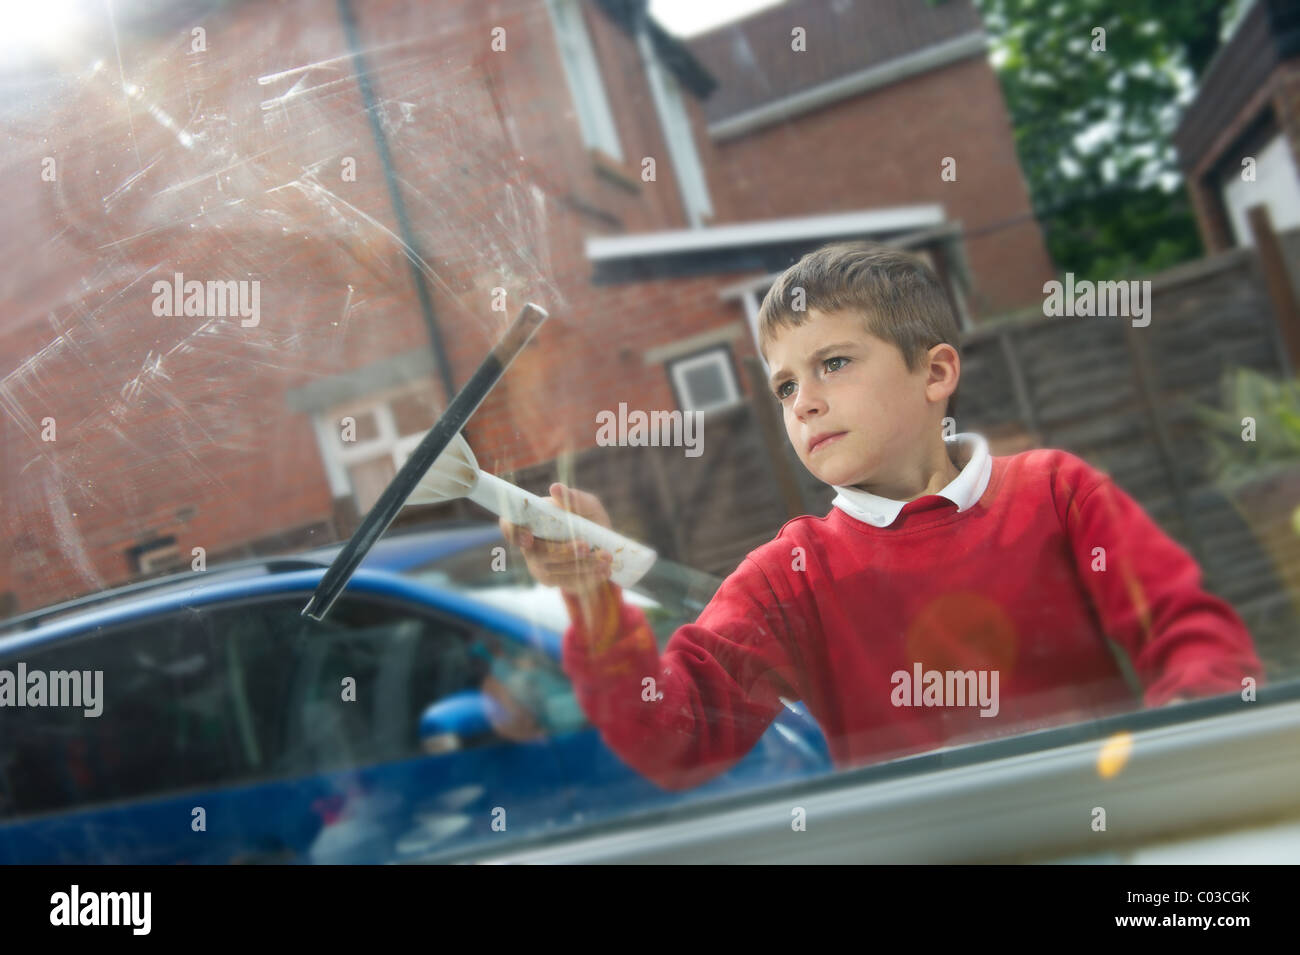 young boy cleaning window for pocket money Stock Photo